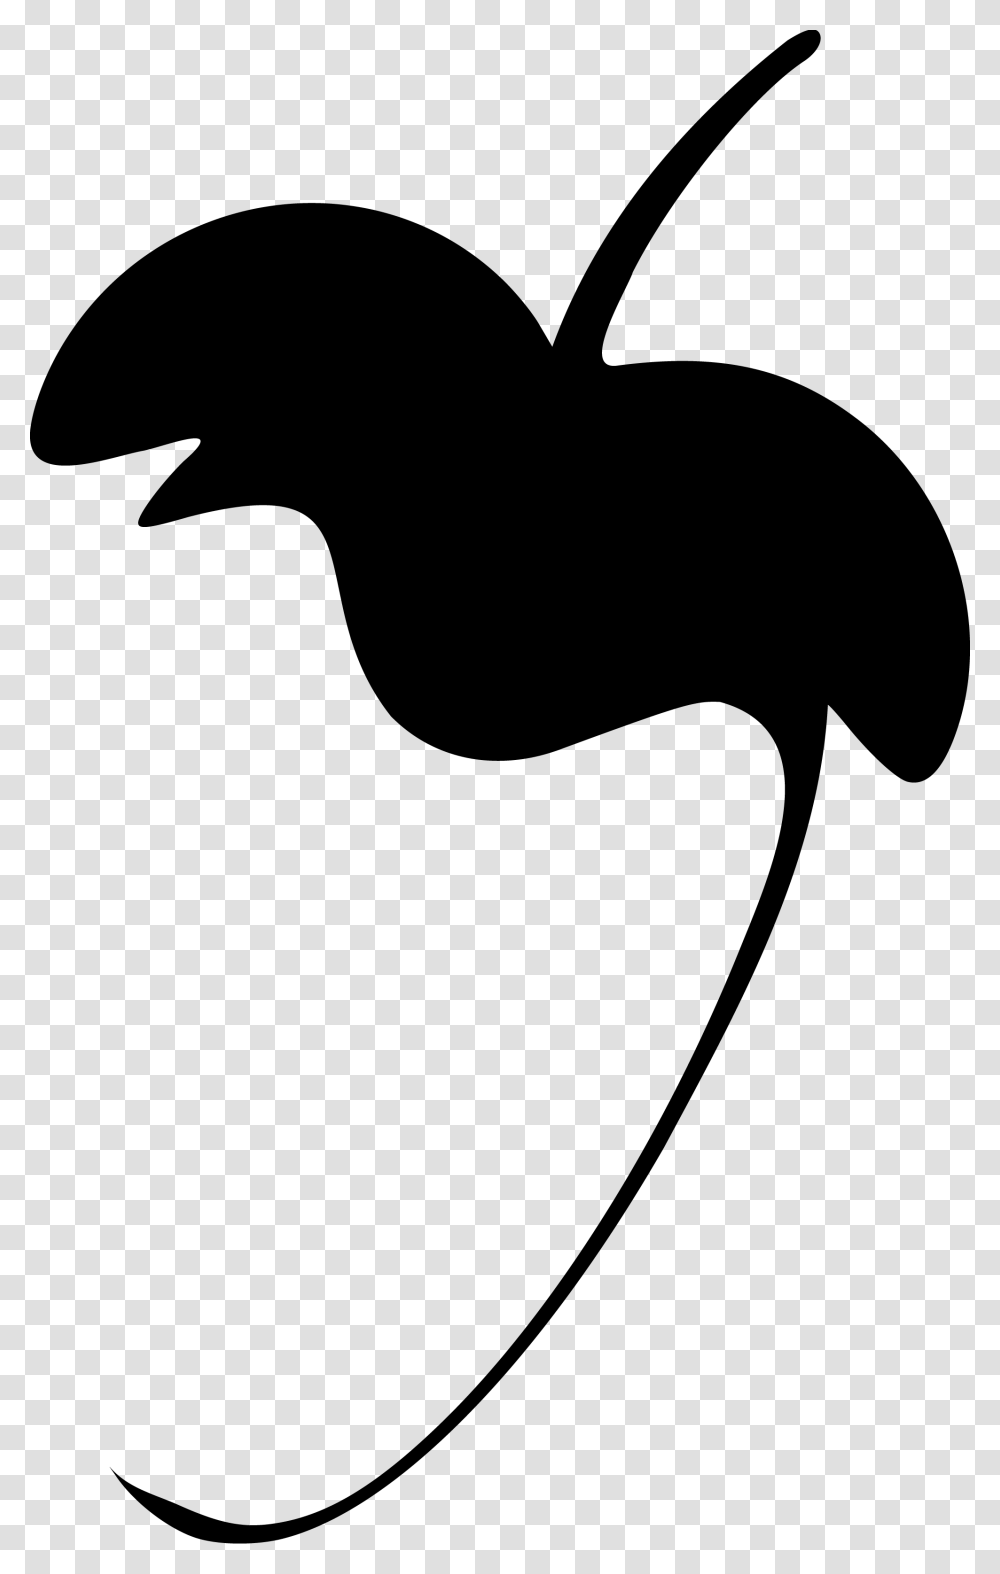 Whats The Name Of The Fl Studio Fruit, Silhouette, Stencil, Animal, Mustache Transparent Png